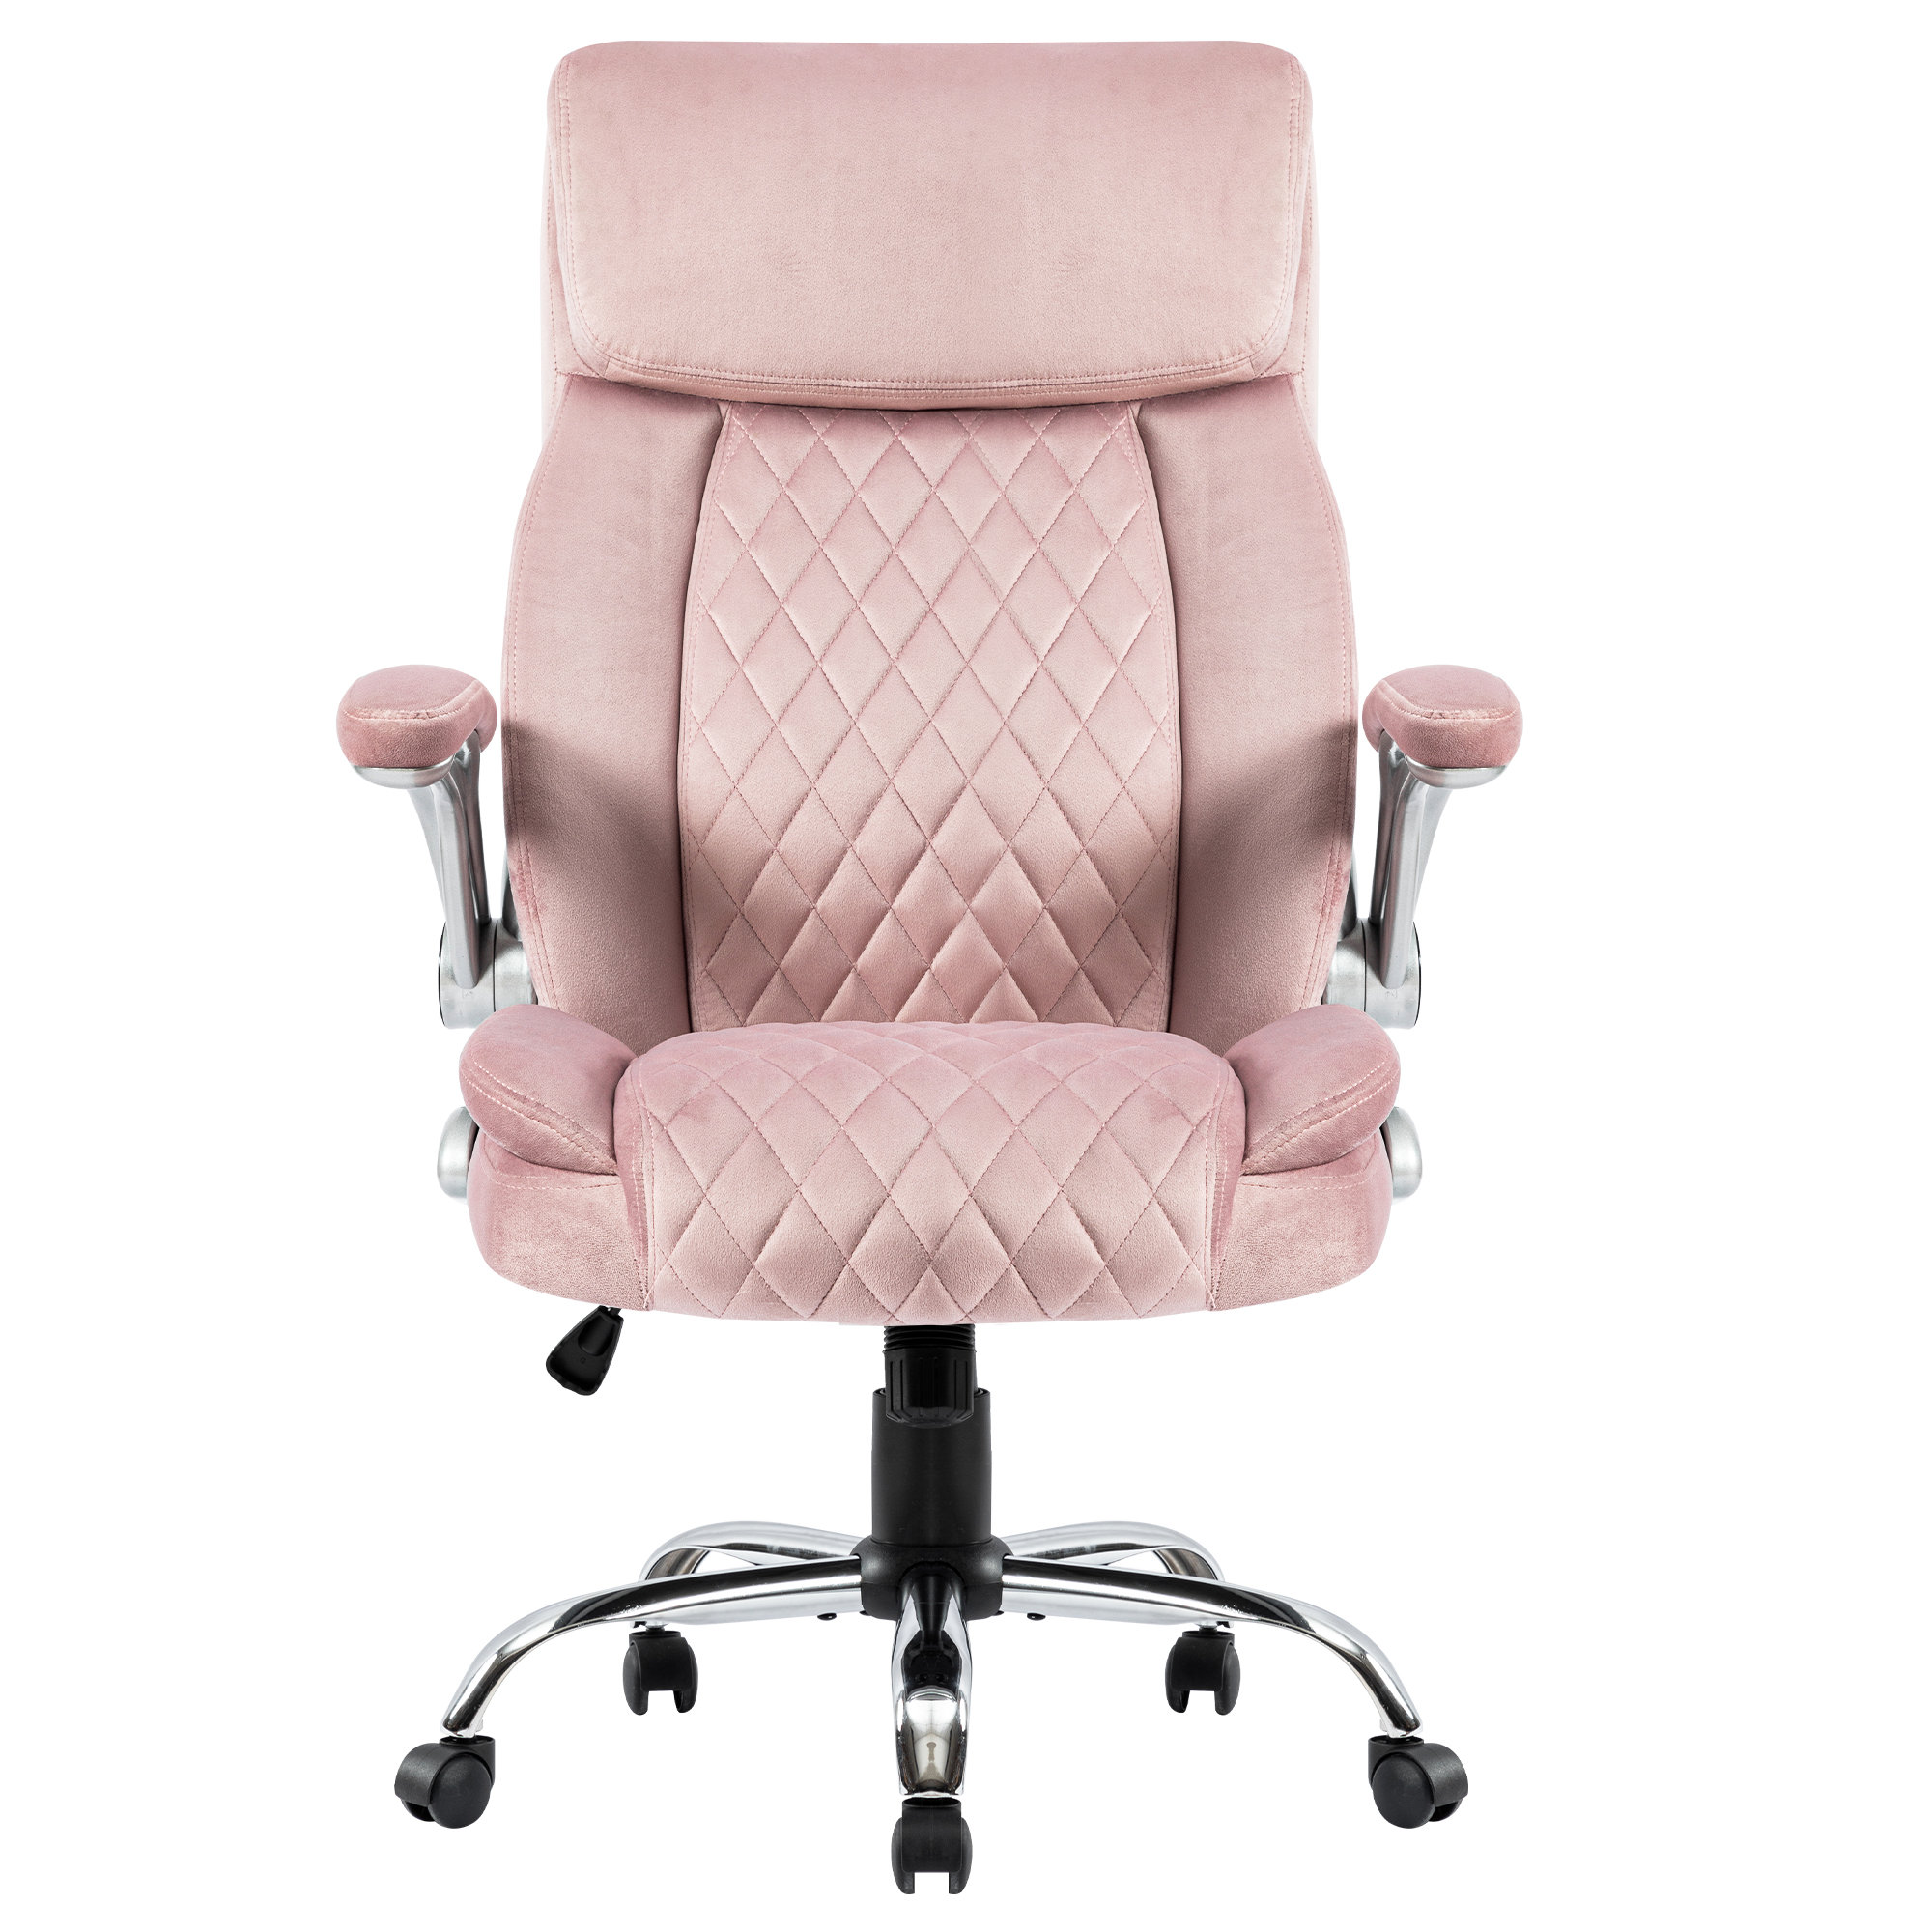 Classic Executive Oversize Ergonomic High-Back Faux Leather Chair  Upholstered with High-quality Air Leather